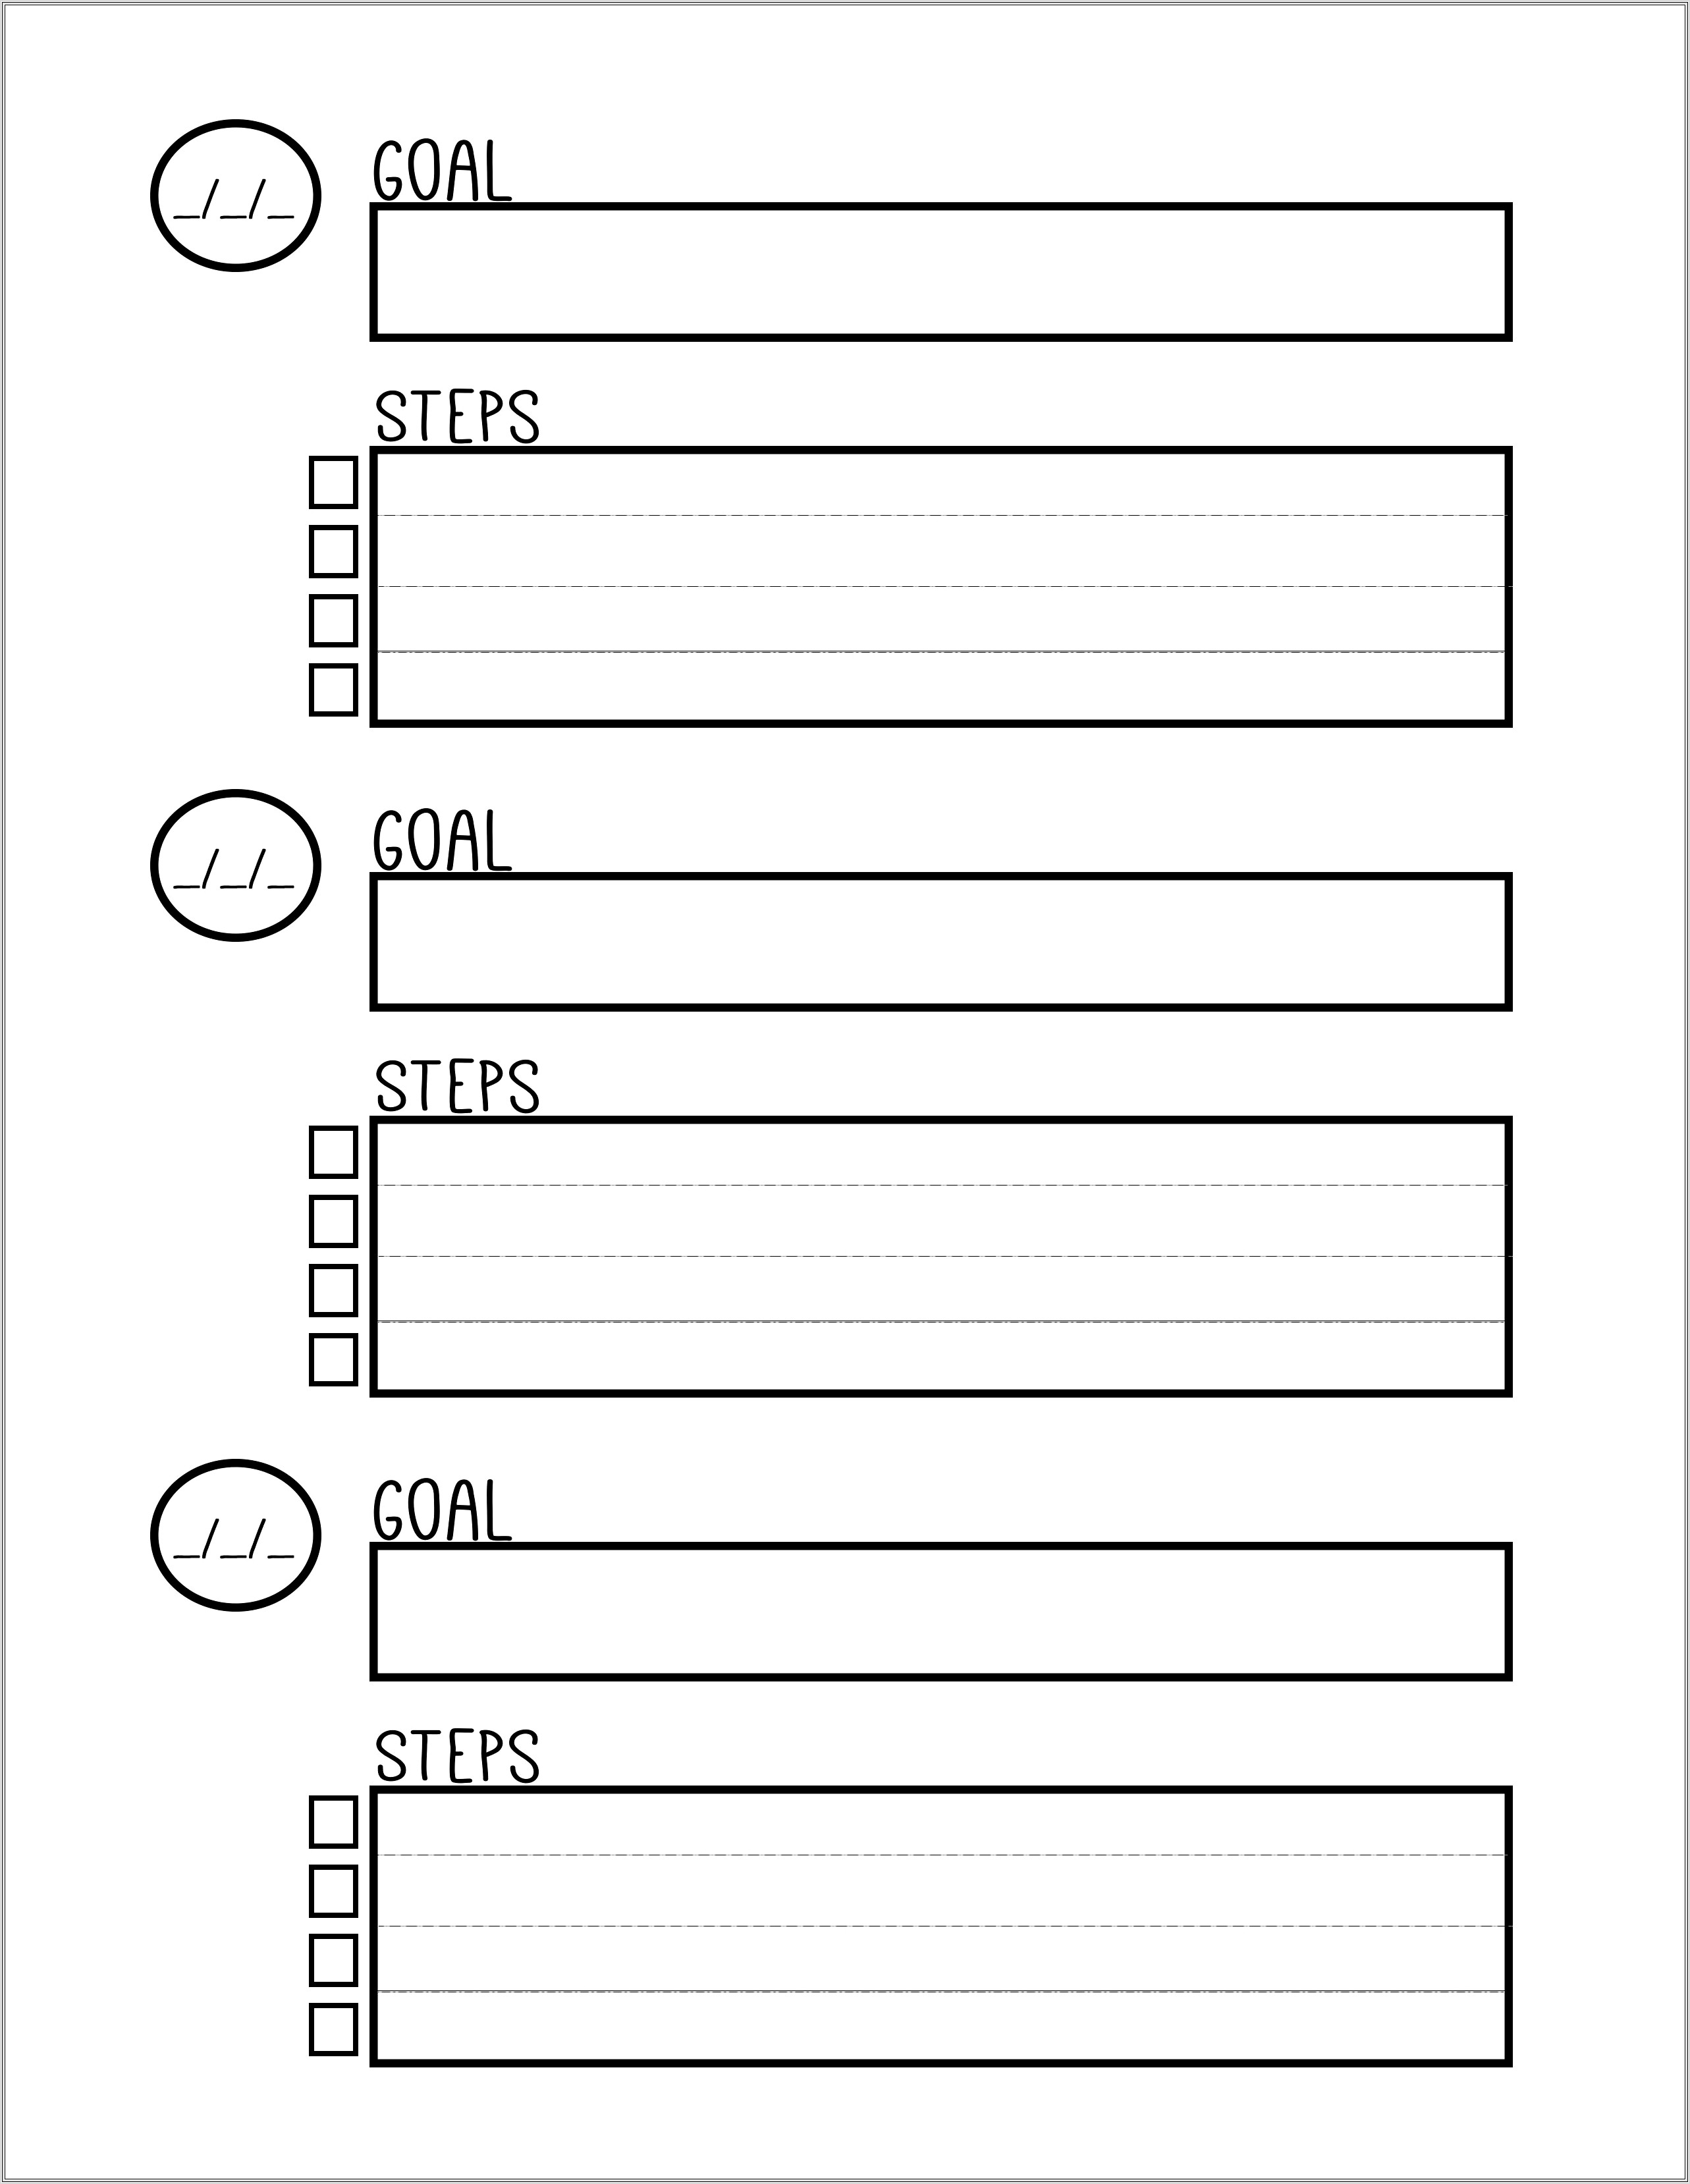 How To Fill Goal Setting Worksheets